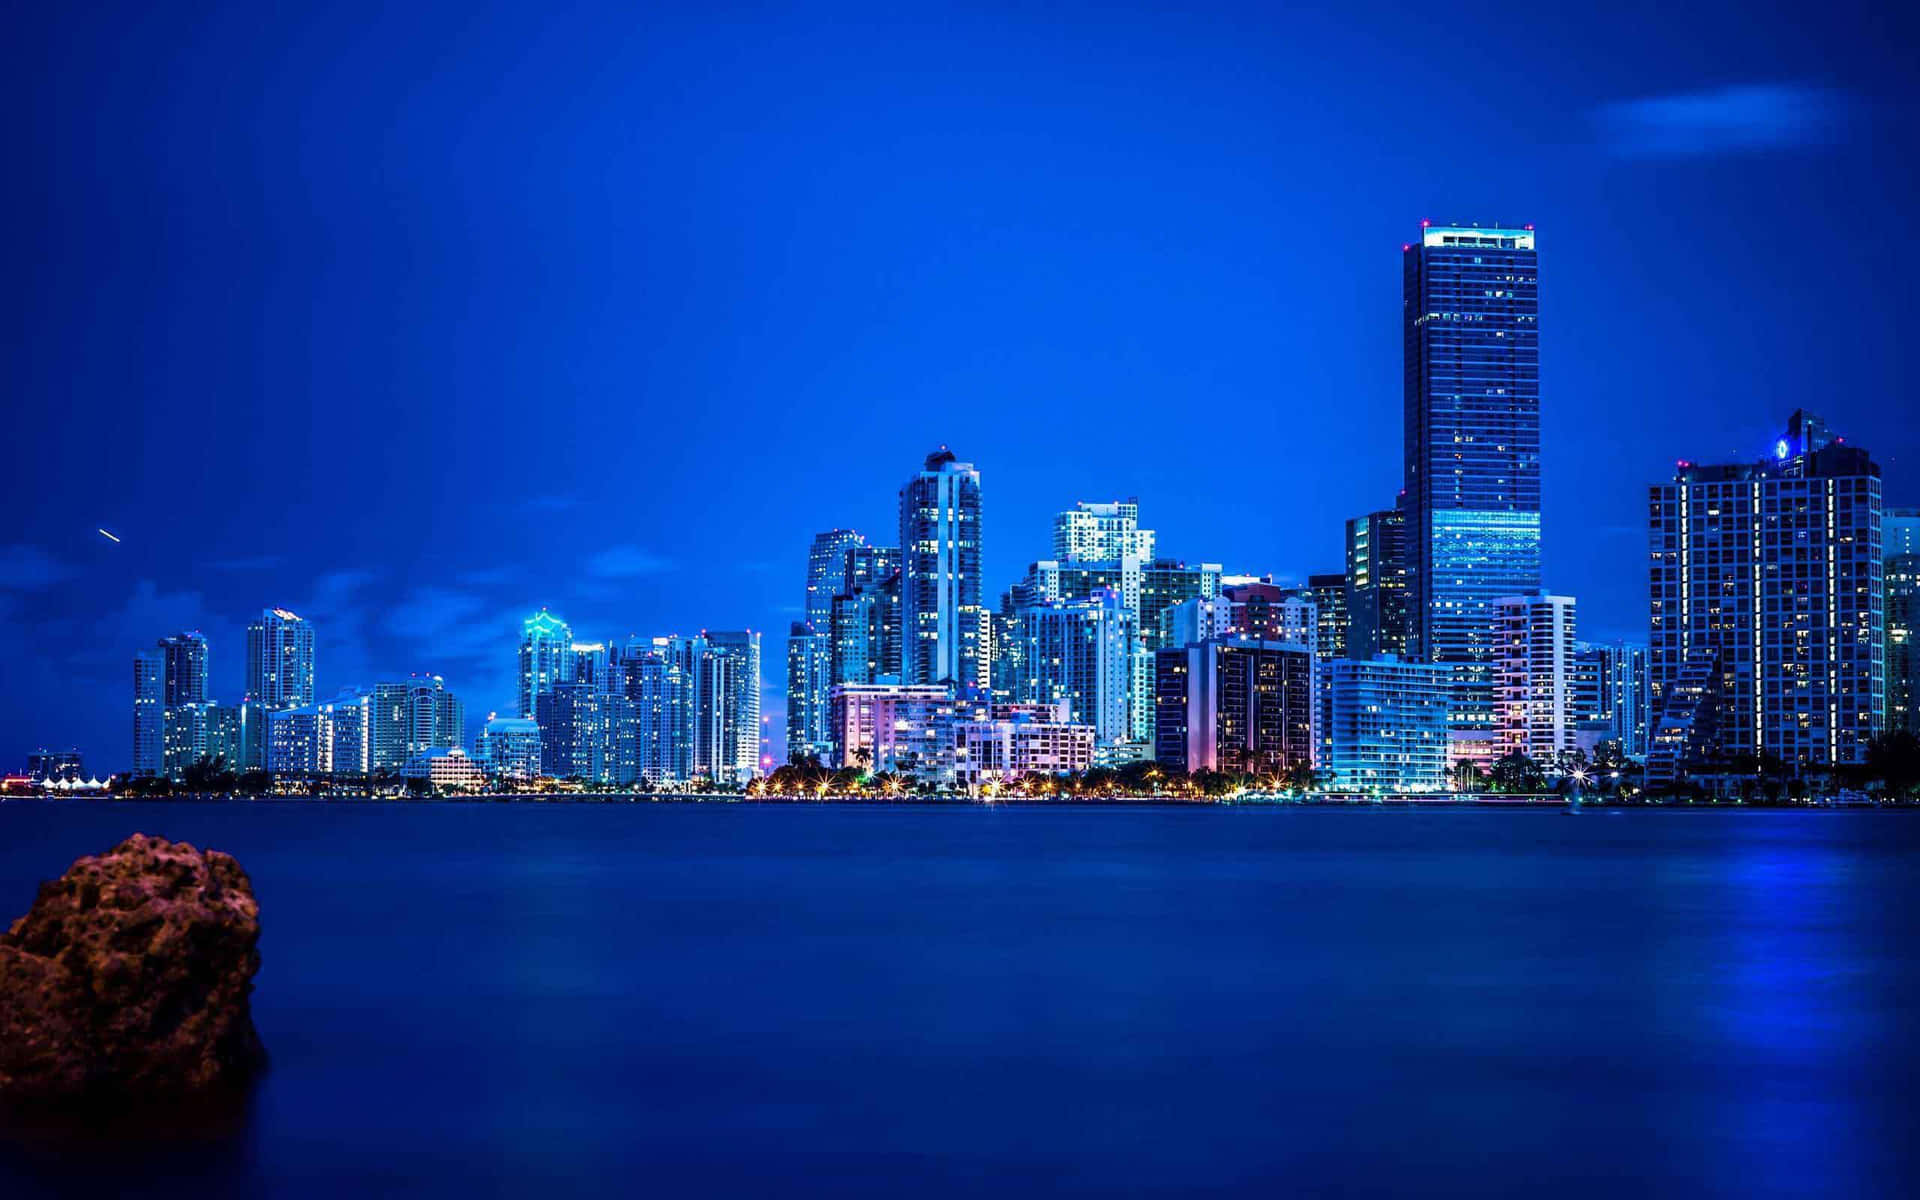 Welcome to the vibrant and colorful city of Miami!